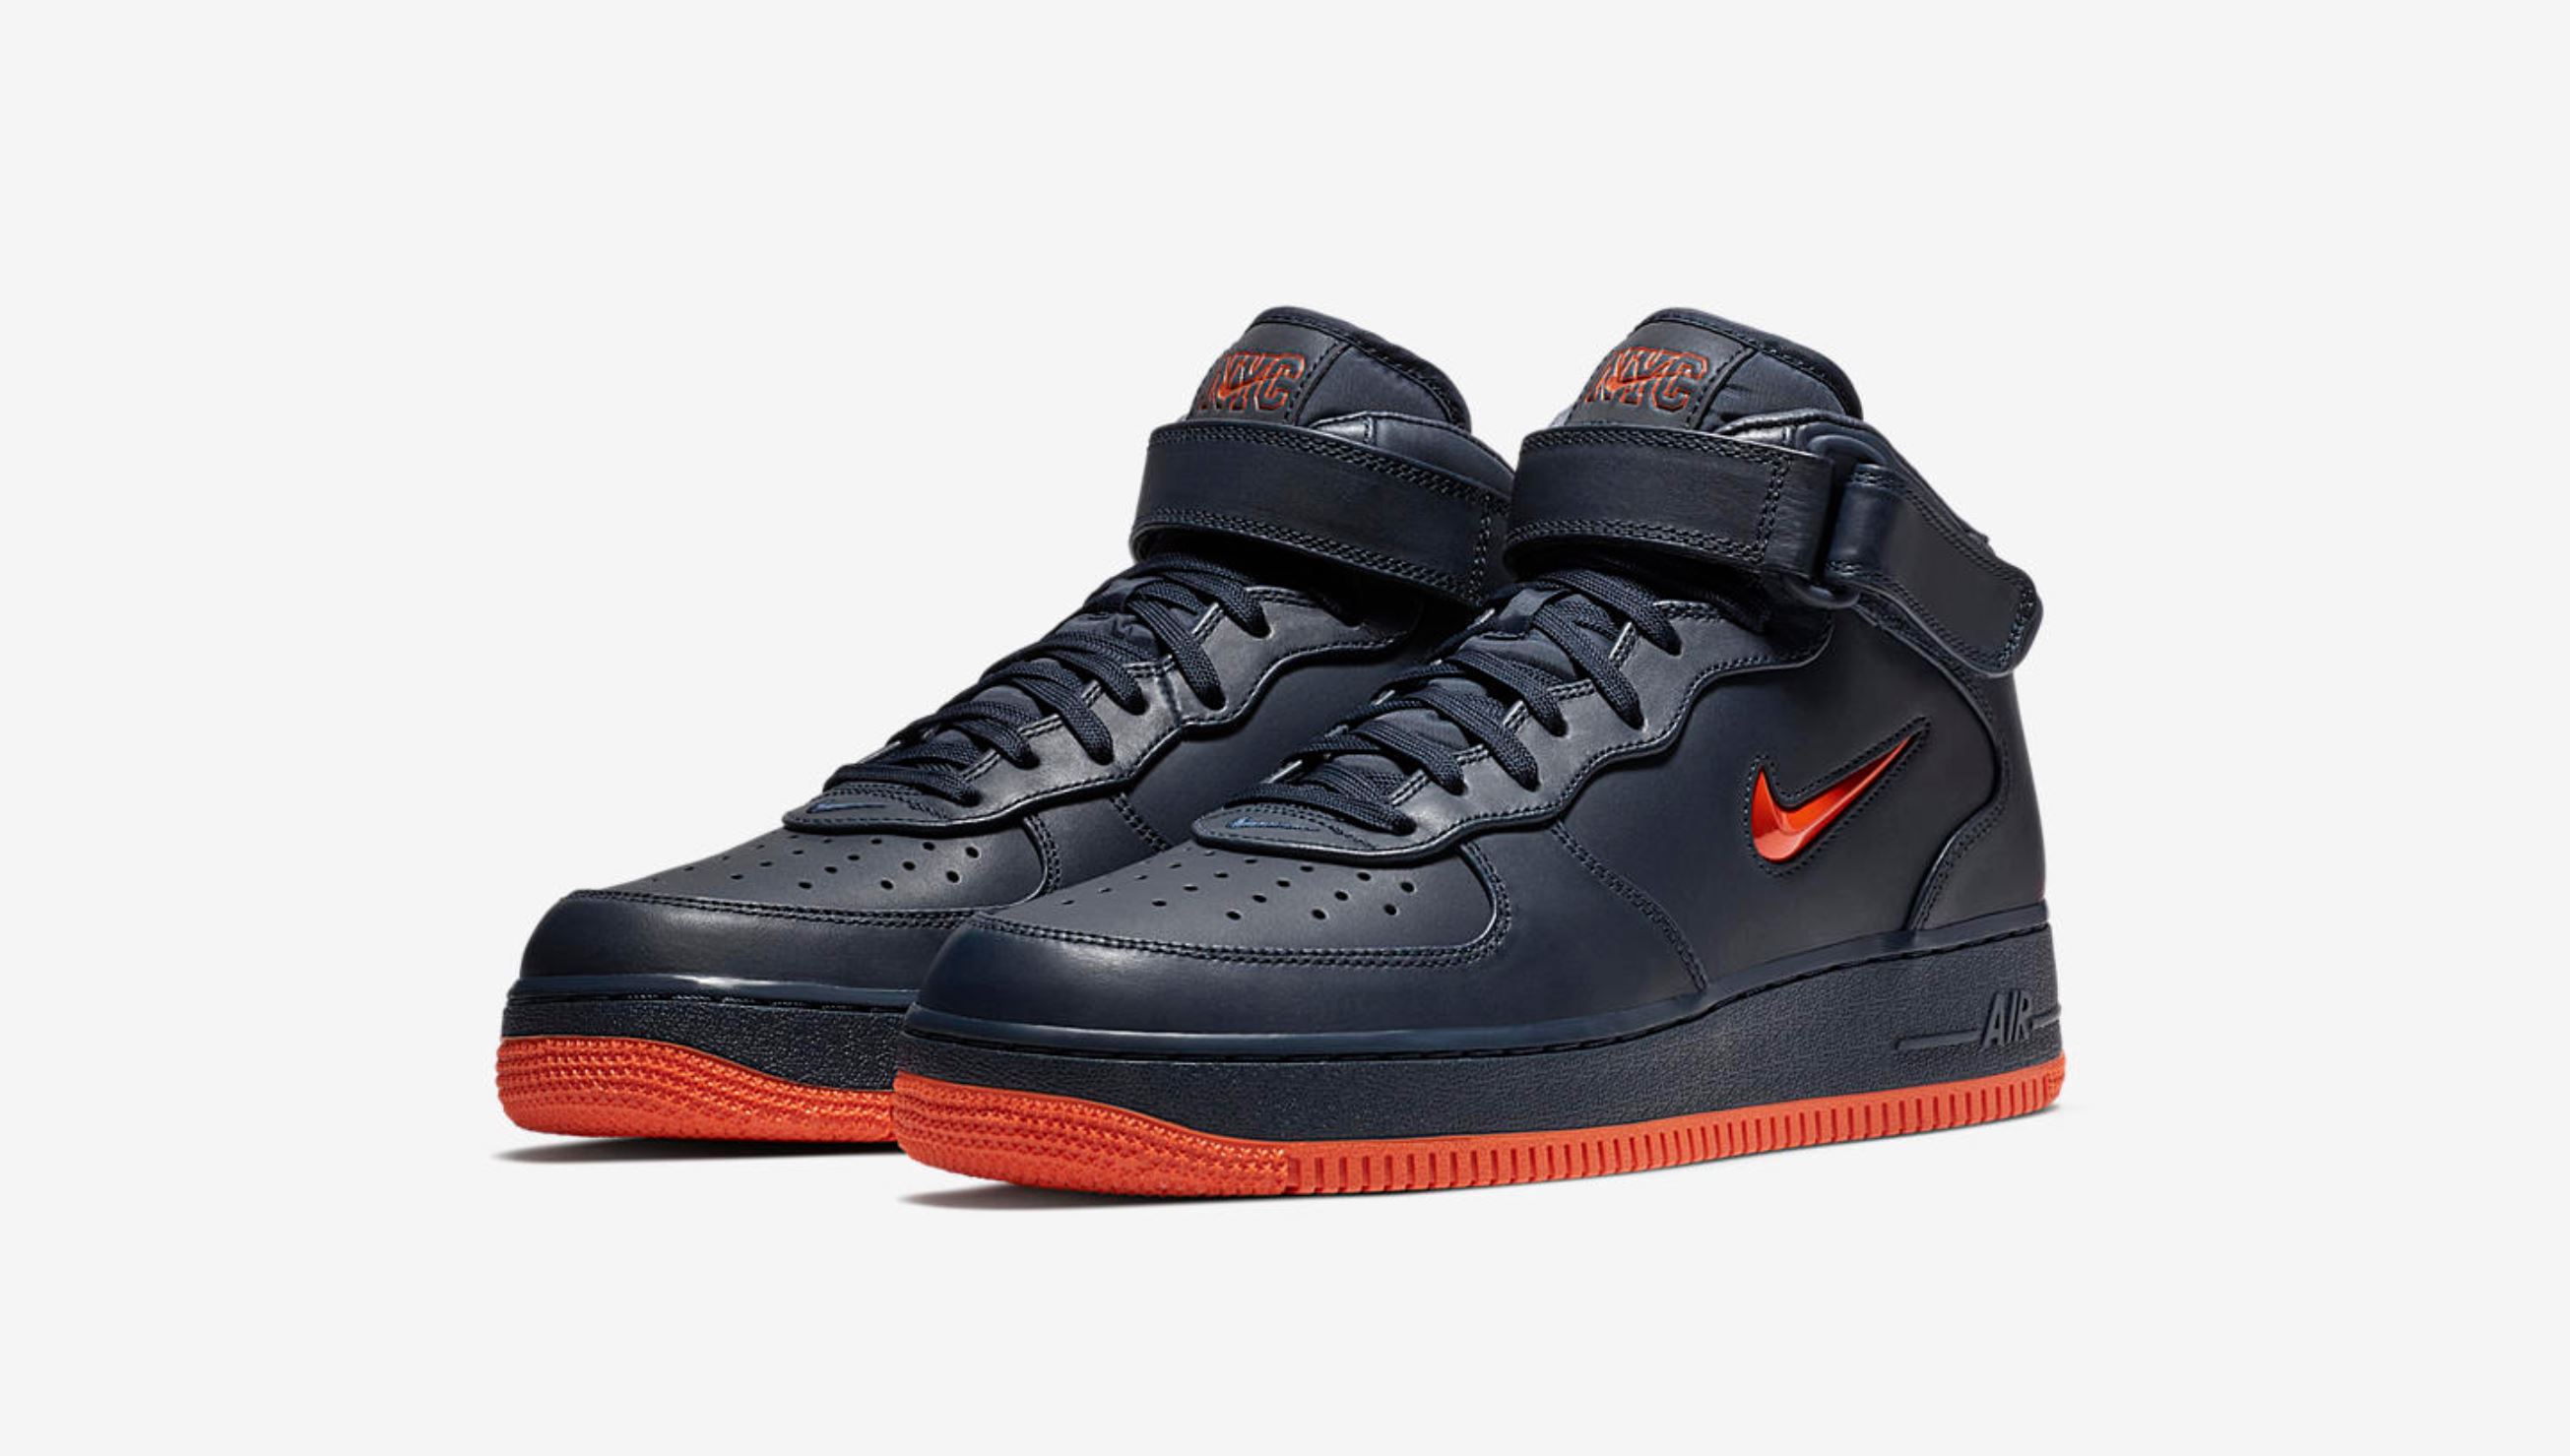 Nike Unveils Special Edition Air Force 1 Pack for NYC in Knicks